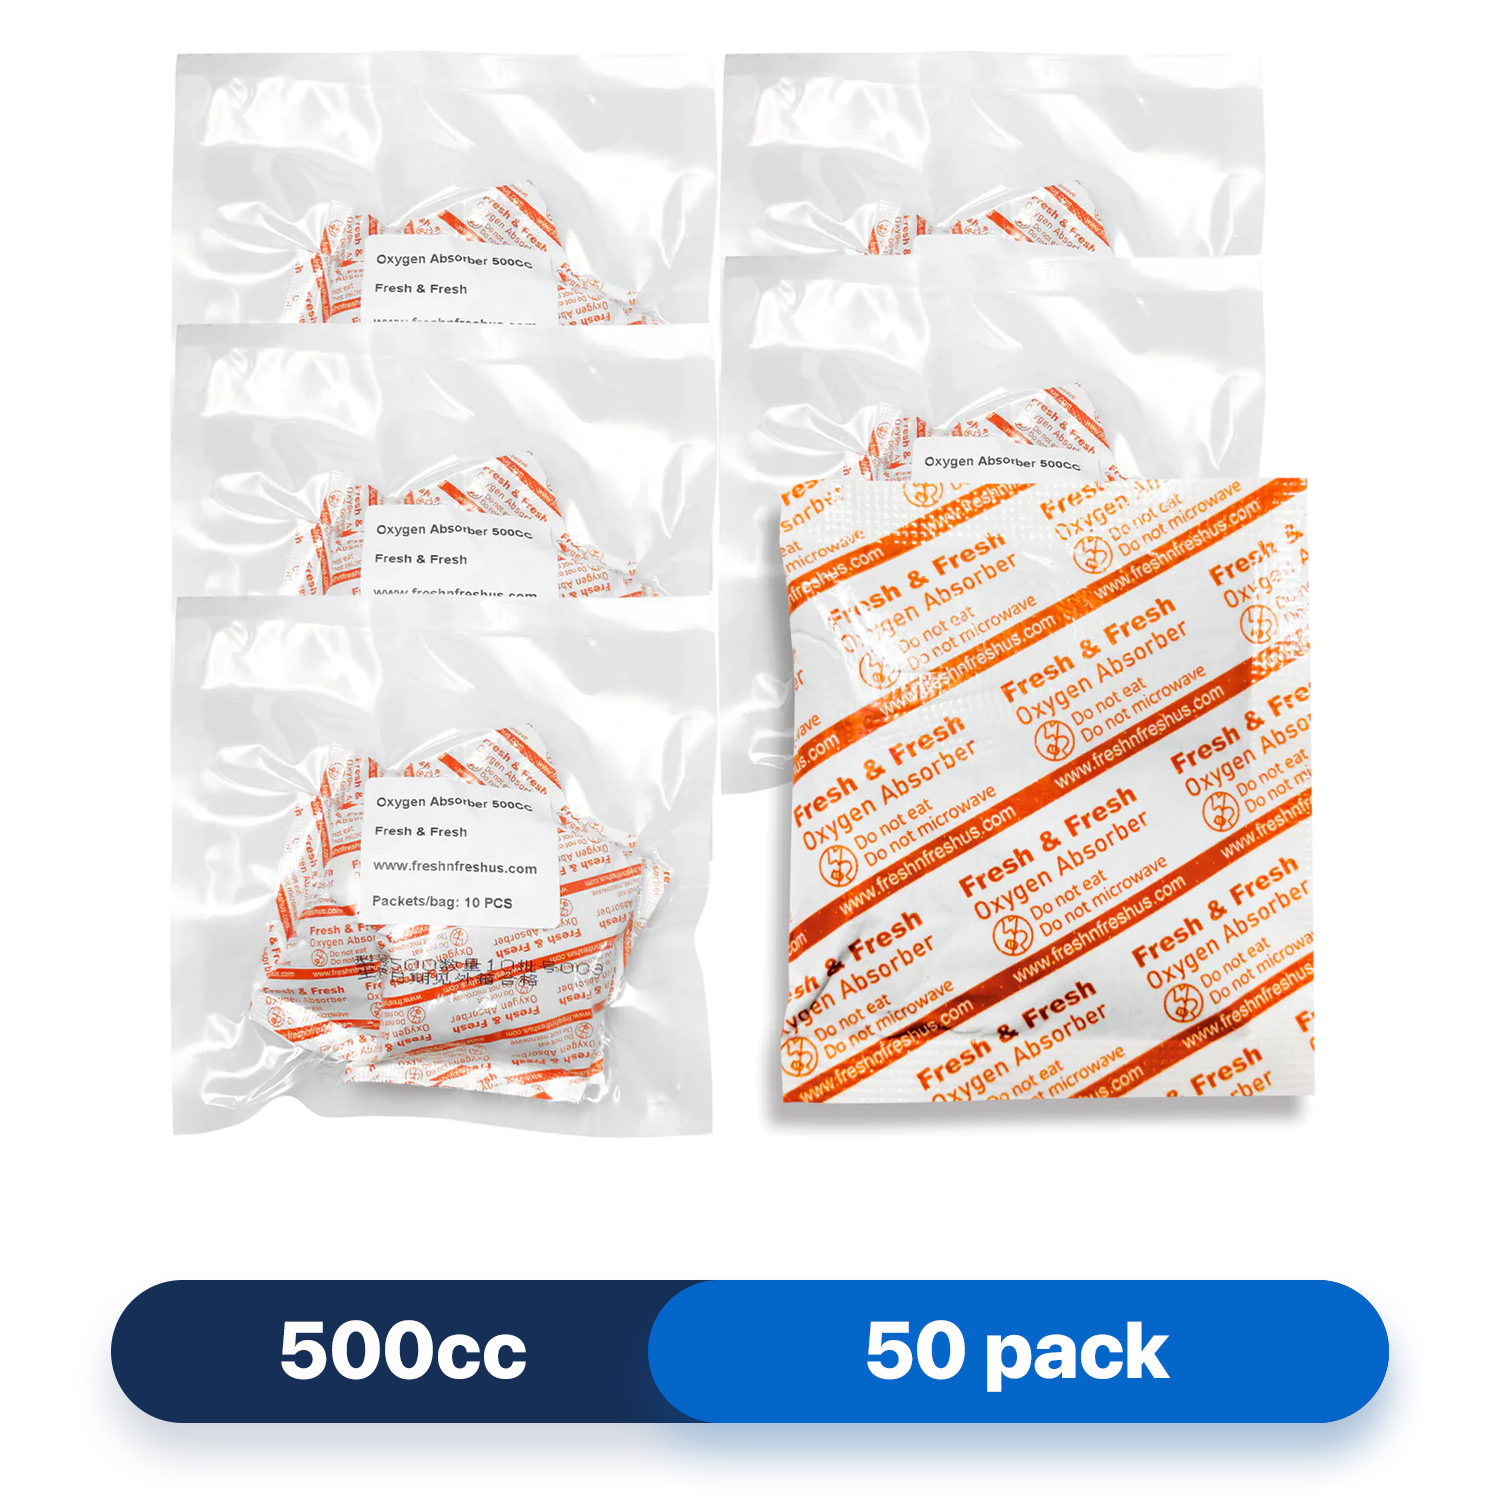 Fresh & Fresh (50 Packs) 500 CC Premium Oxygen Absorbers(5 Bag of 10 packets) - ISO 9001 Certified Facility Manufactured